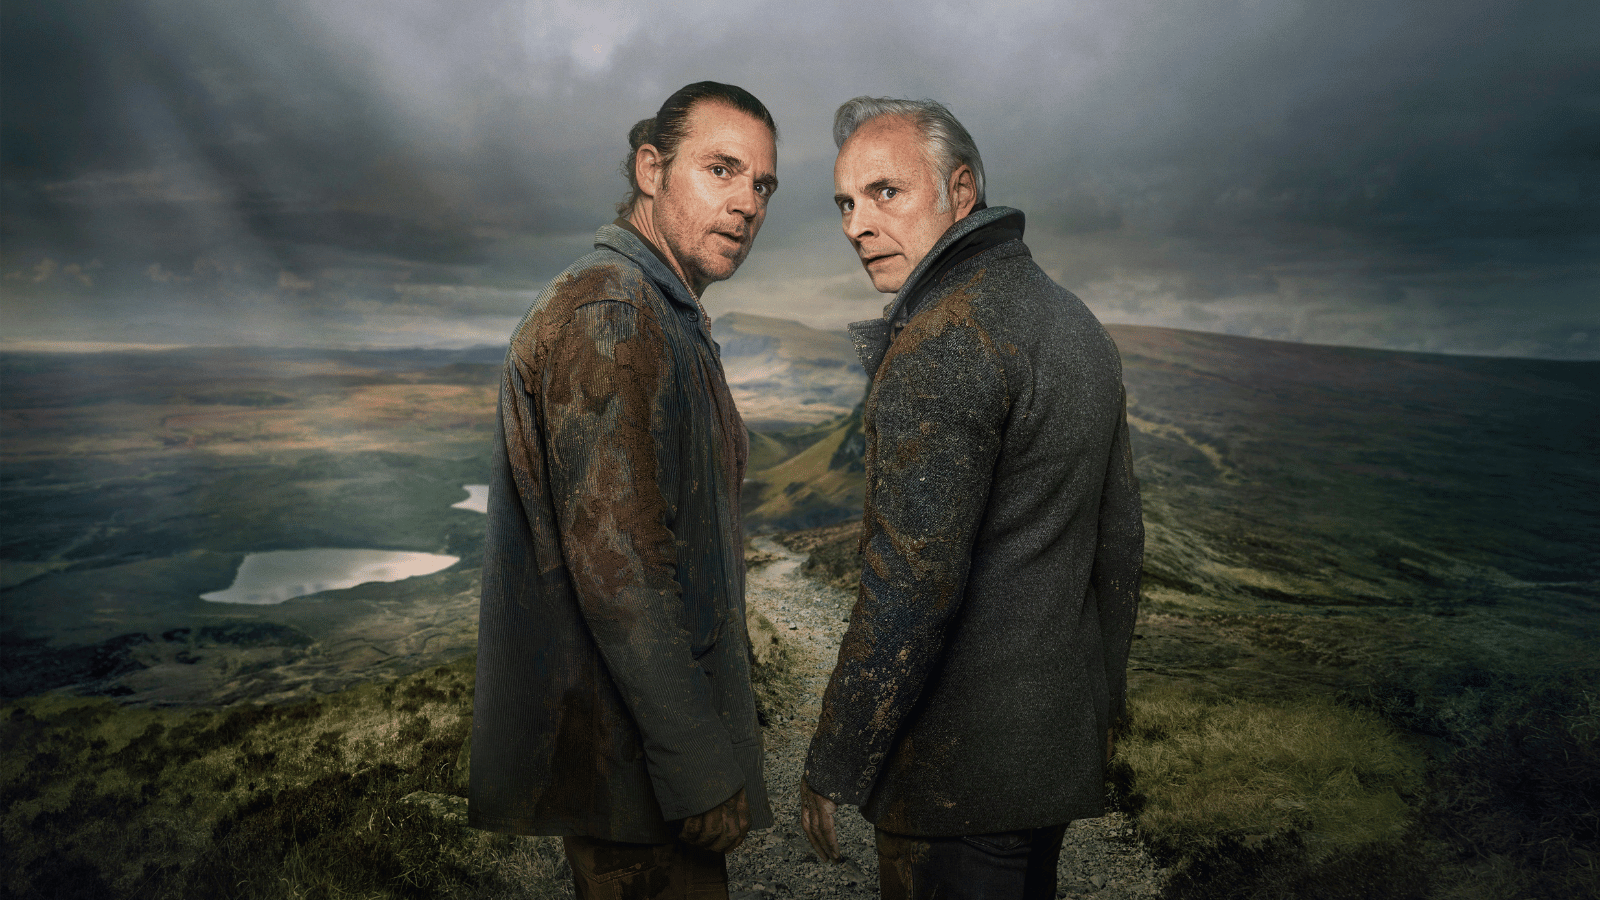 Guilt 3 promotional image. Jamie Sives and Mark Bonnar have their backs to the camera with their faces looking towards the camera with concerned expressions. They have first on their clothes and a Scottish landscape can be seen behind them.